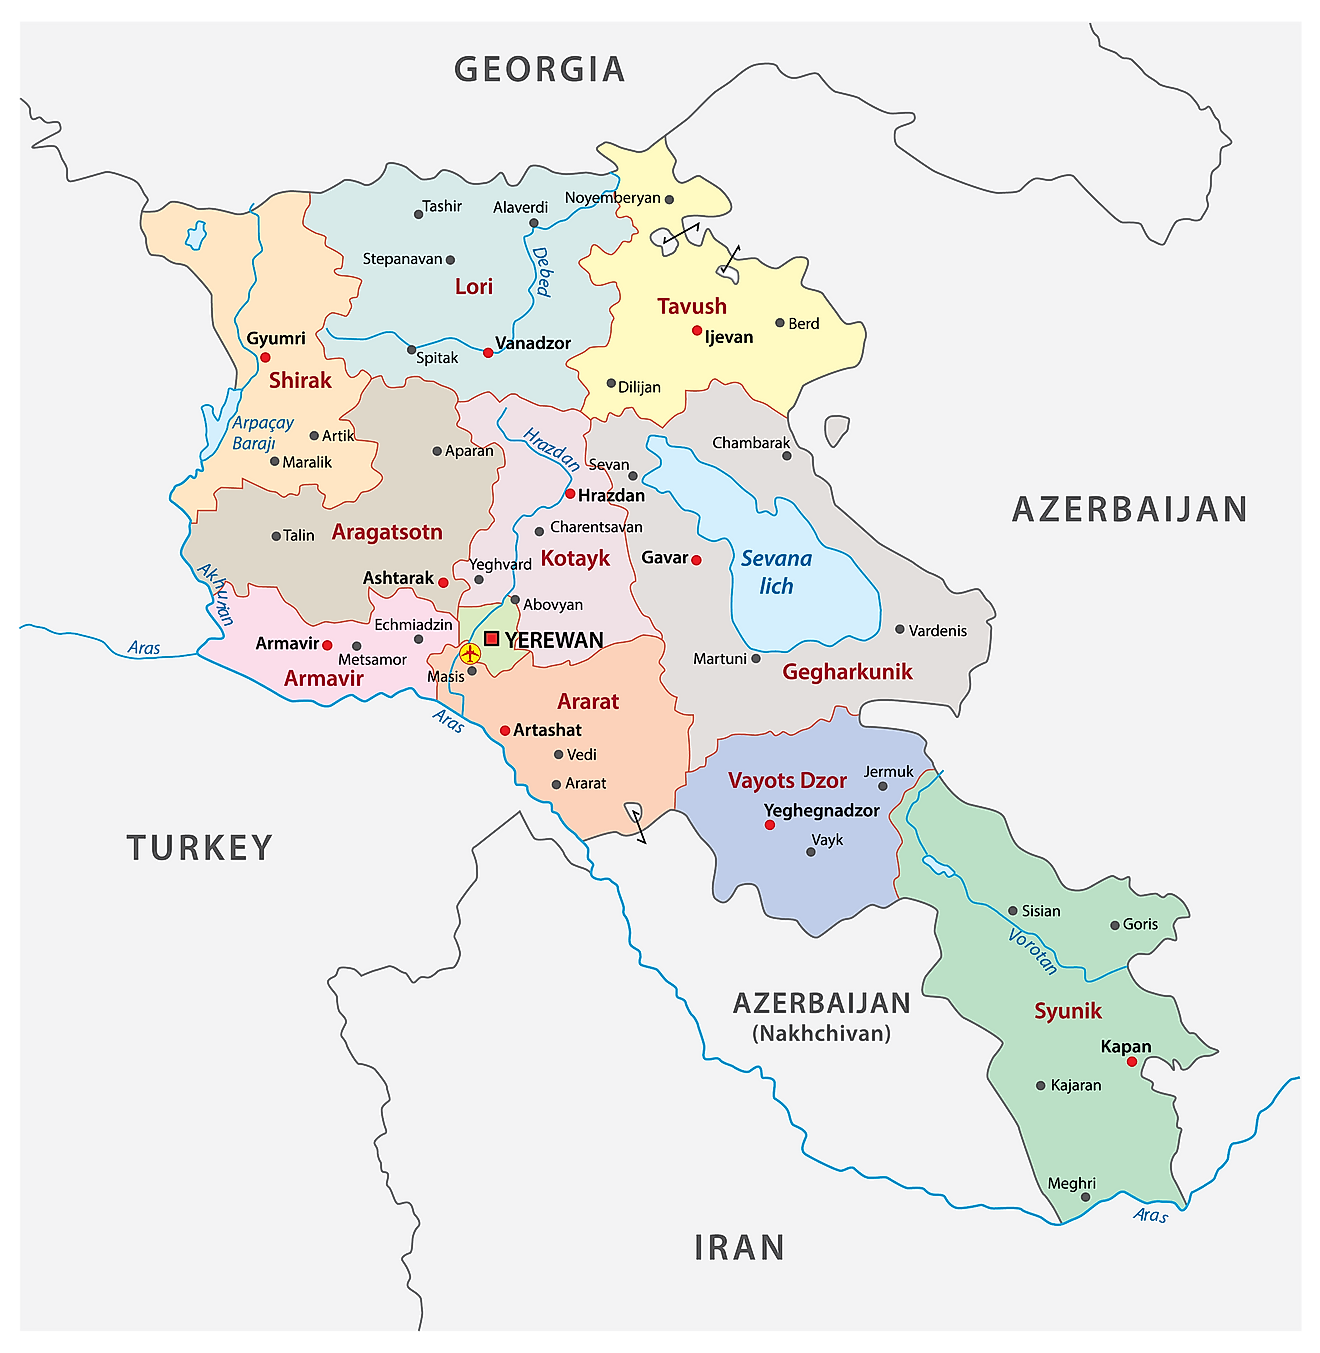 Political Map of Armenia showing the 11 provinces and the capital city of Yerevan.